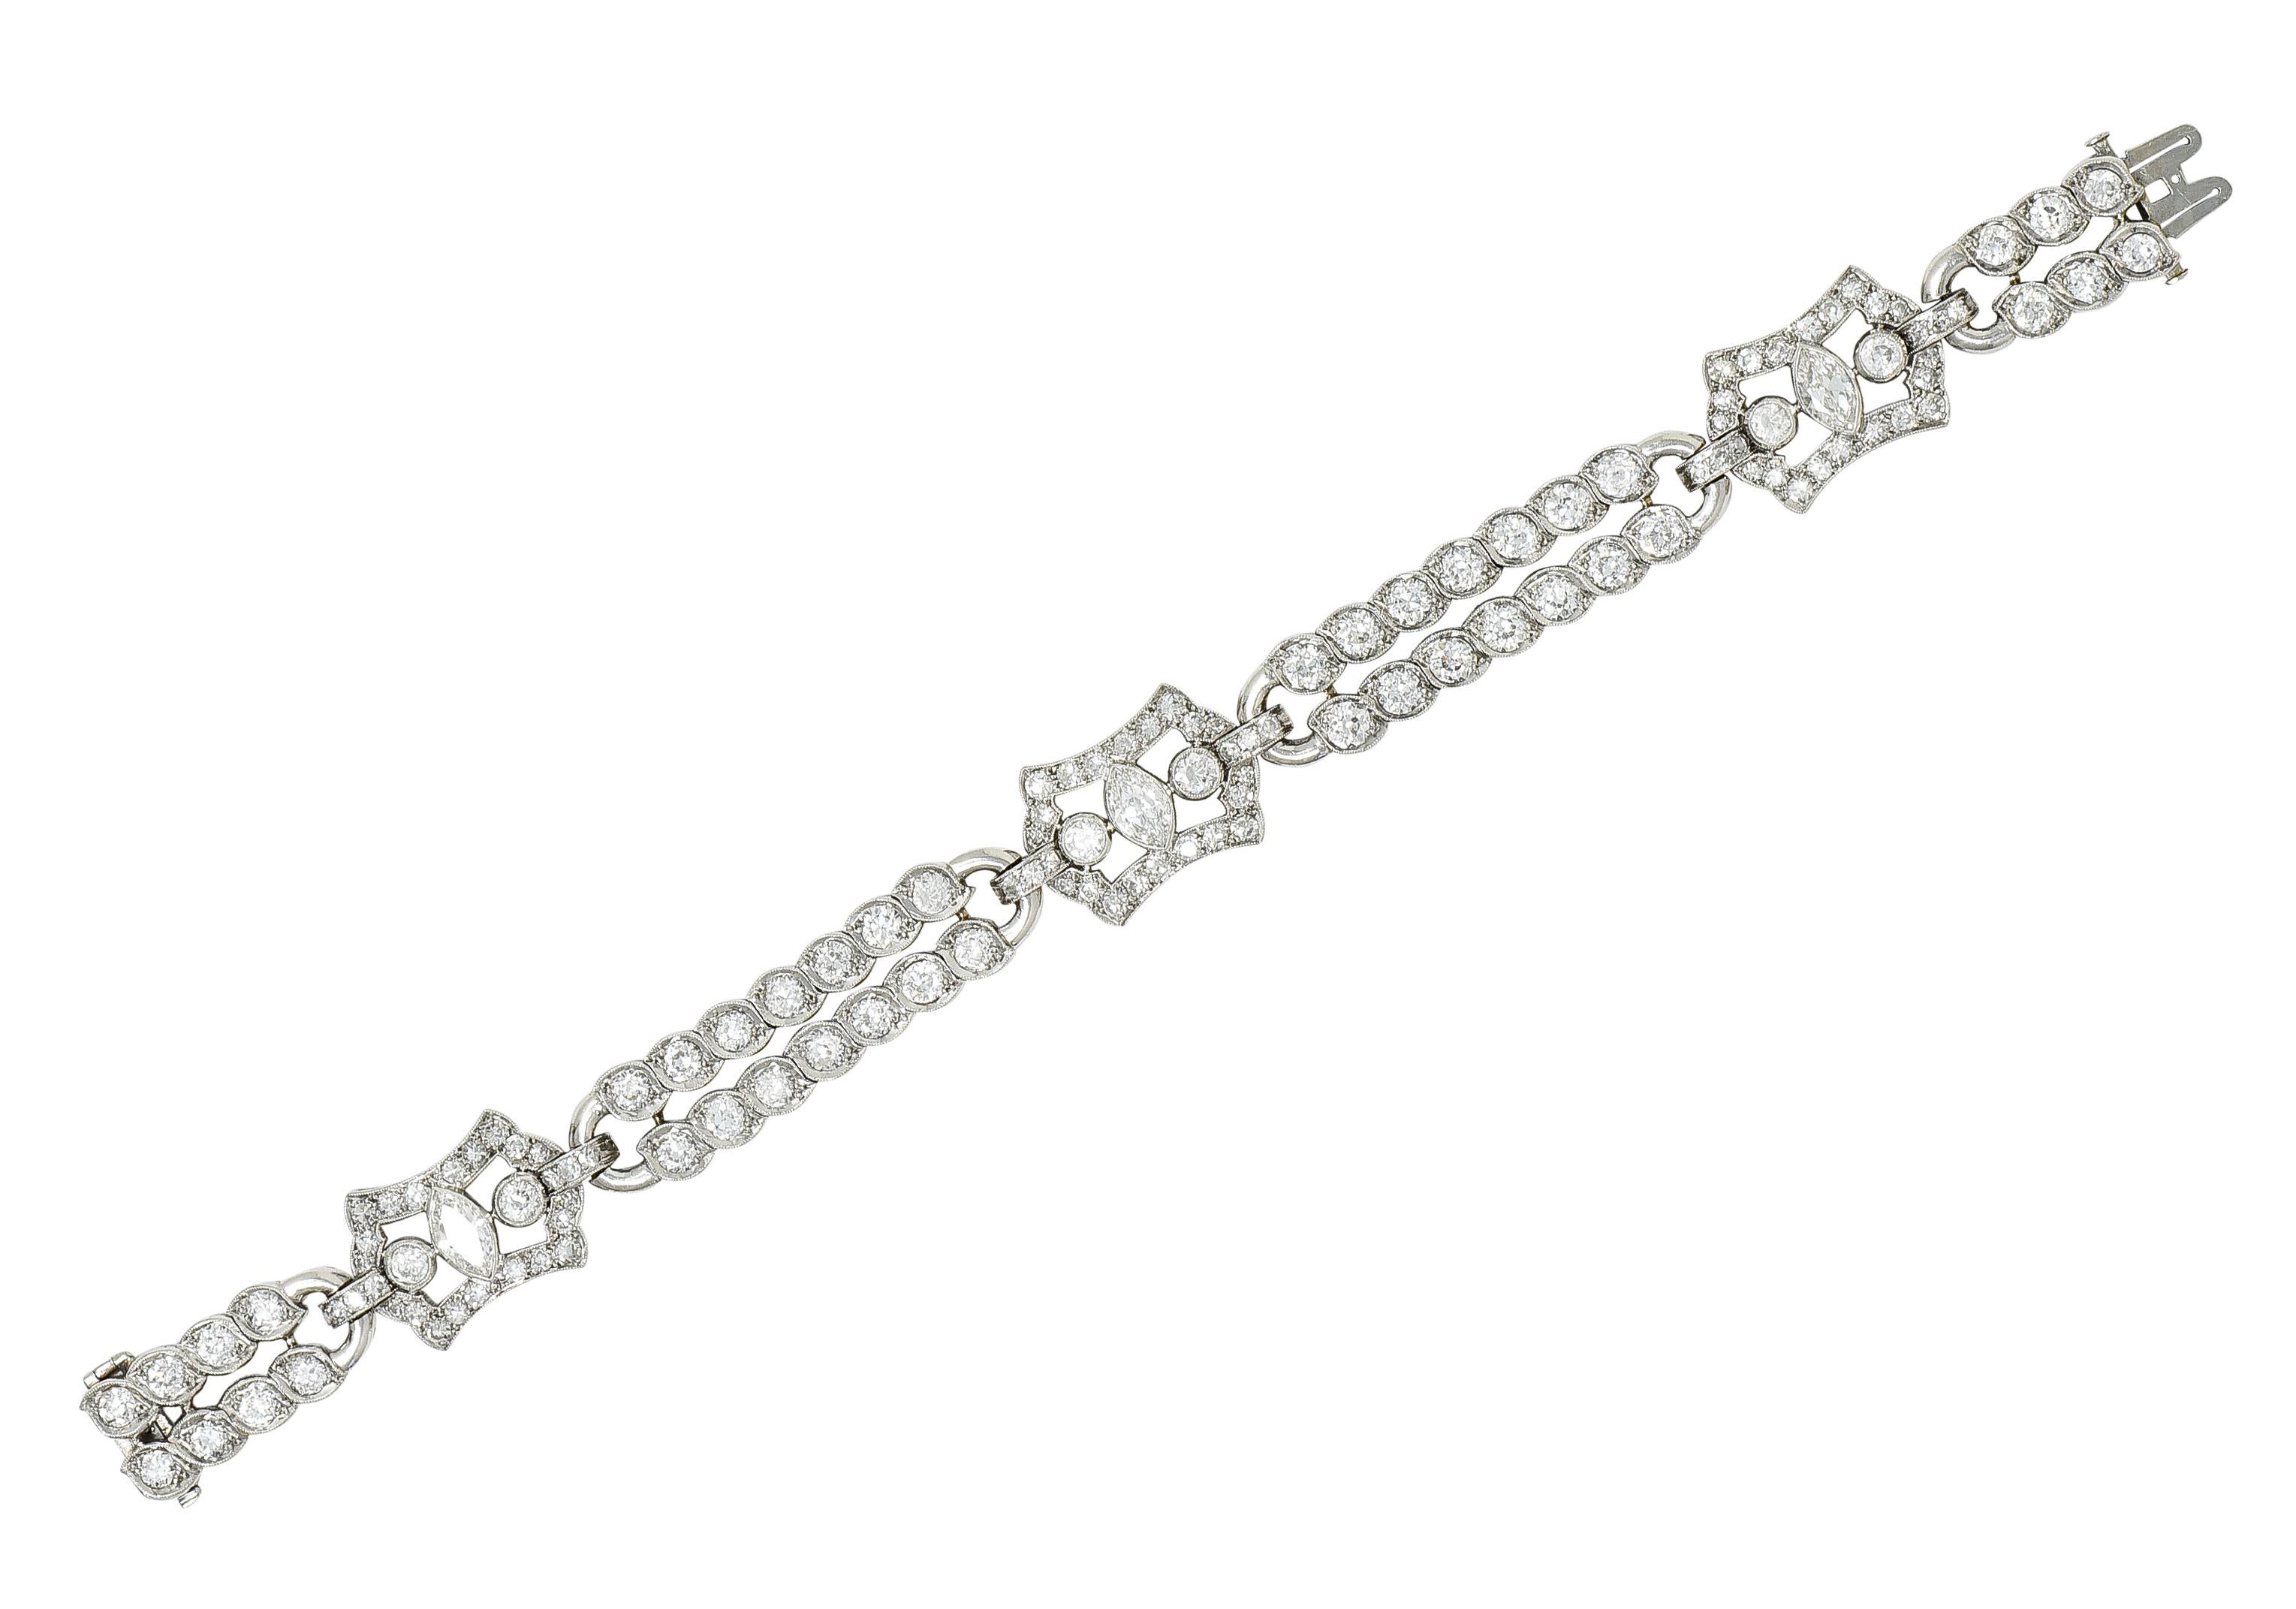 Comprised of two rows of hinged links alternating in pattern with pierced cartouche shaped stations. Each station centers marquise cut diamonds weighing approximately 1.20 carat total - I color with VS1 clarity. With old European cut diamonds bead